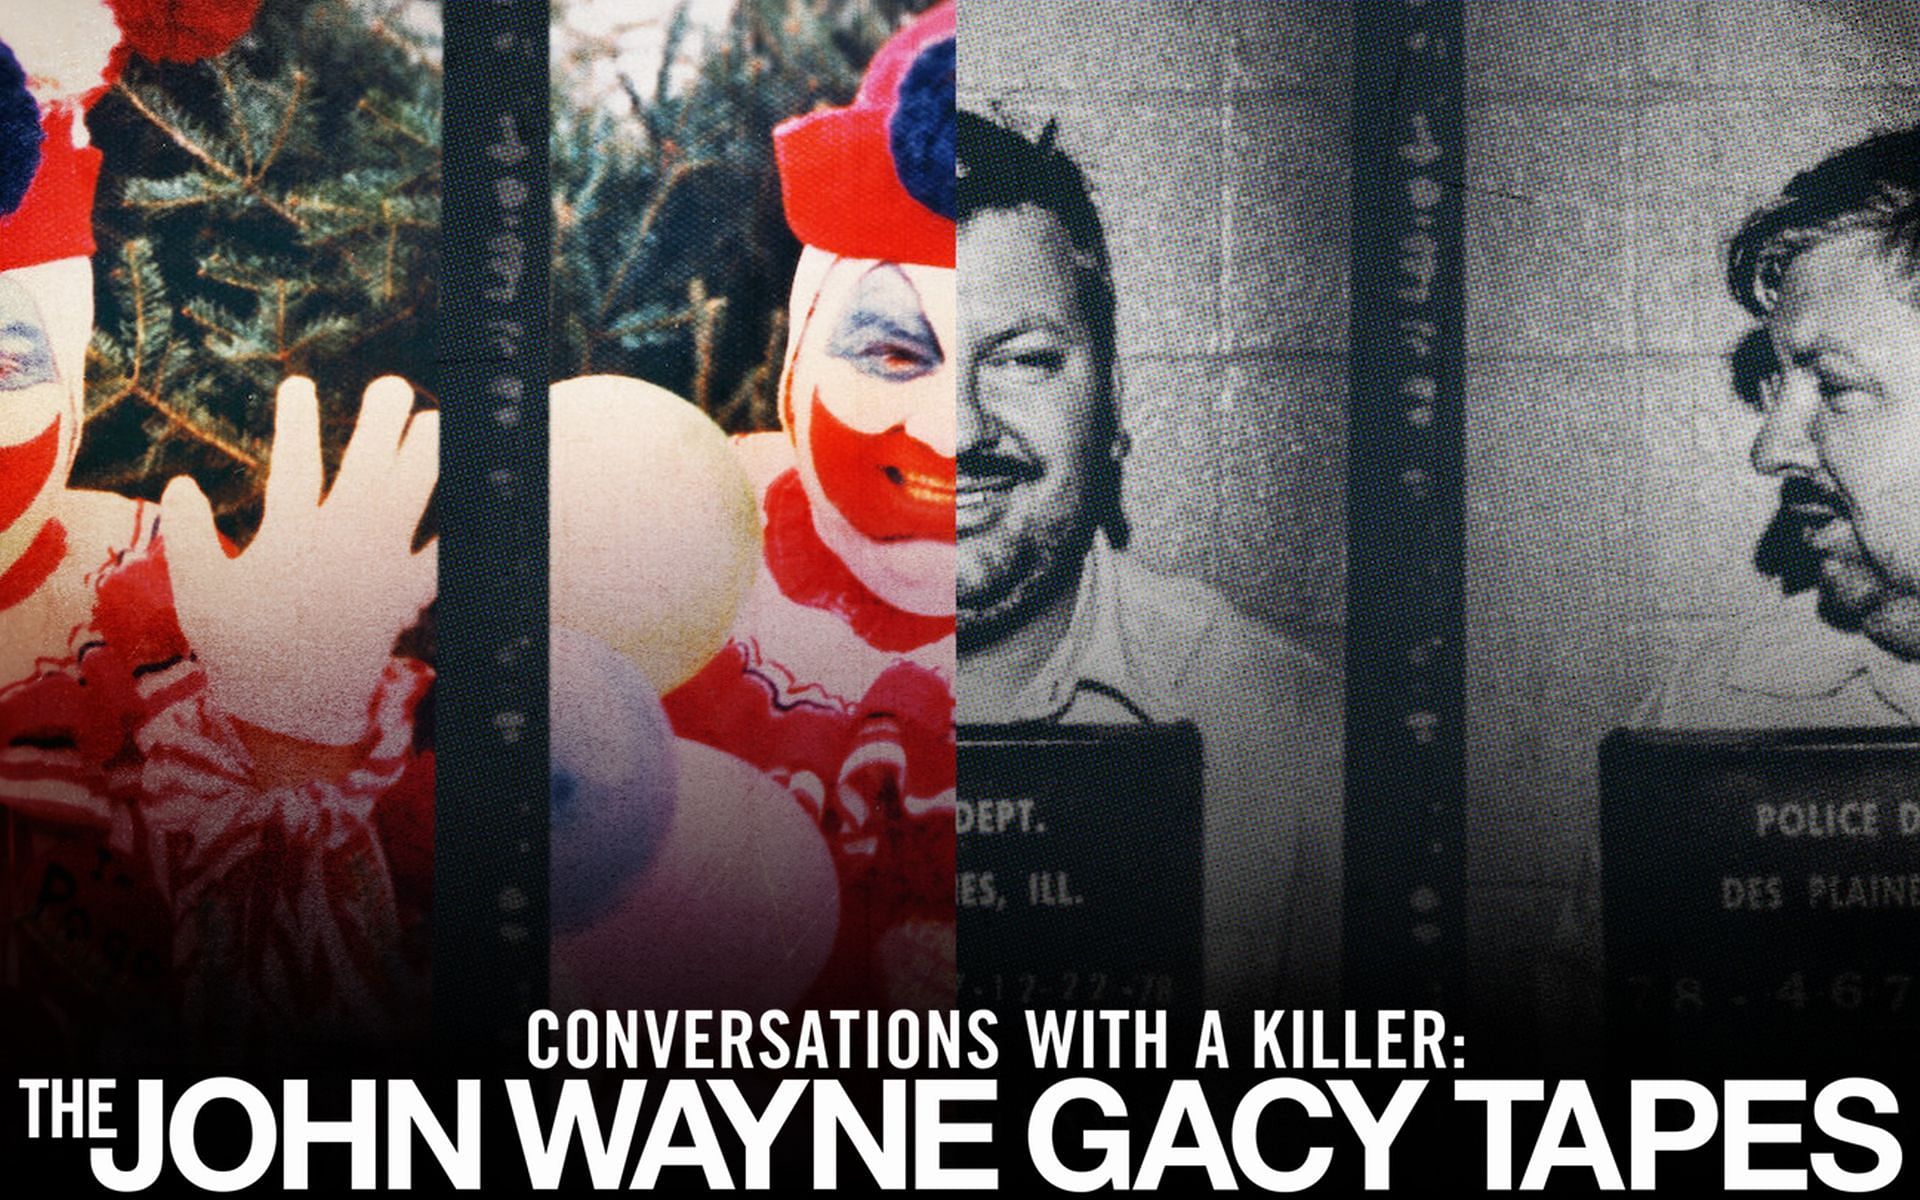 Conversations with a Killer: The John Wayne Gacy Tapes will be released exclusively on Netflix on April 20, 2022. (Image via Netflix)